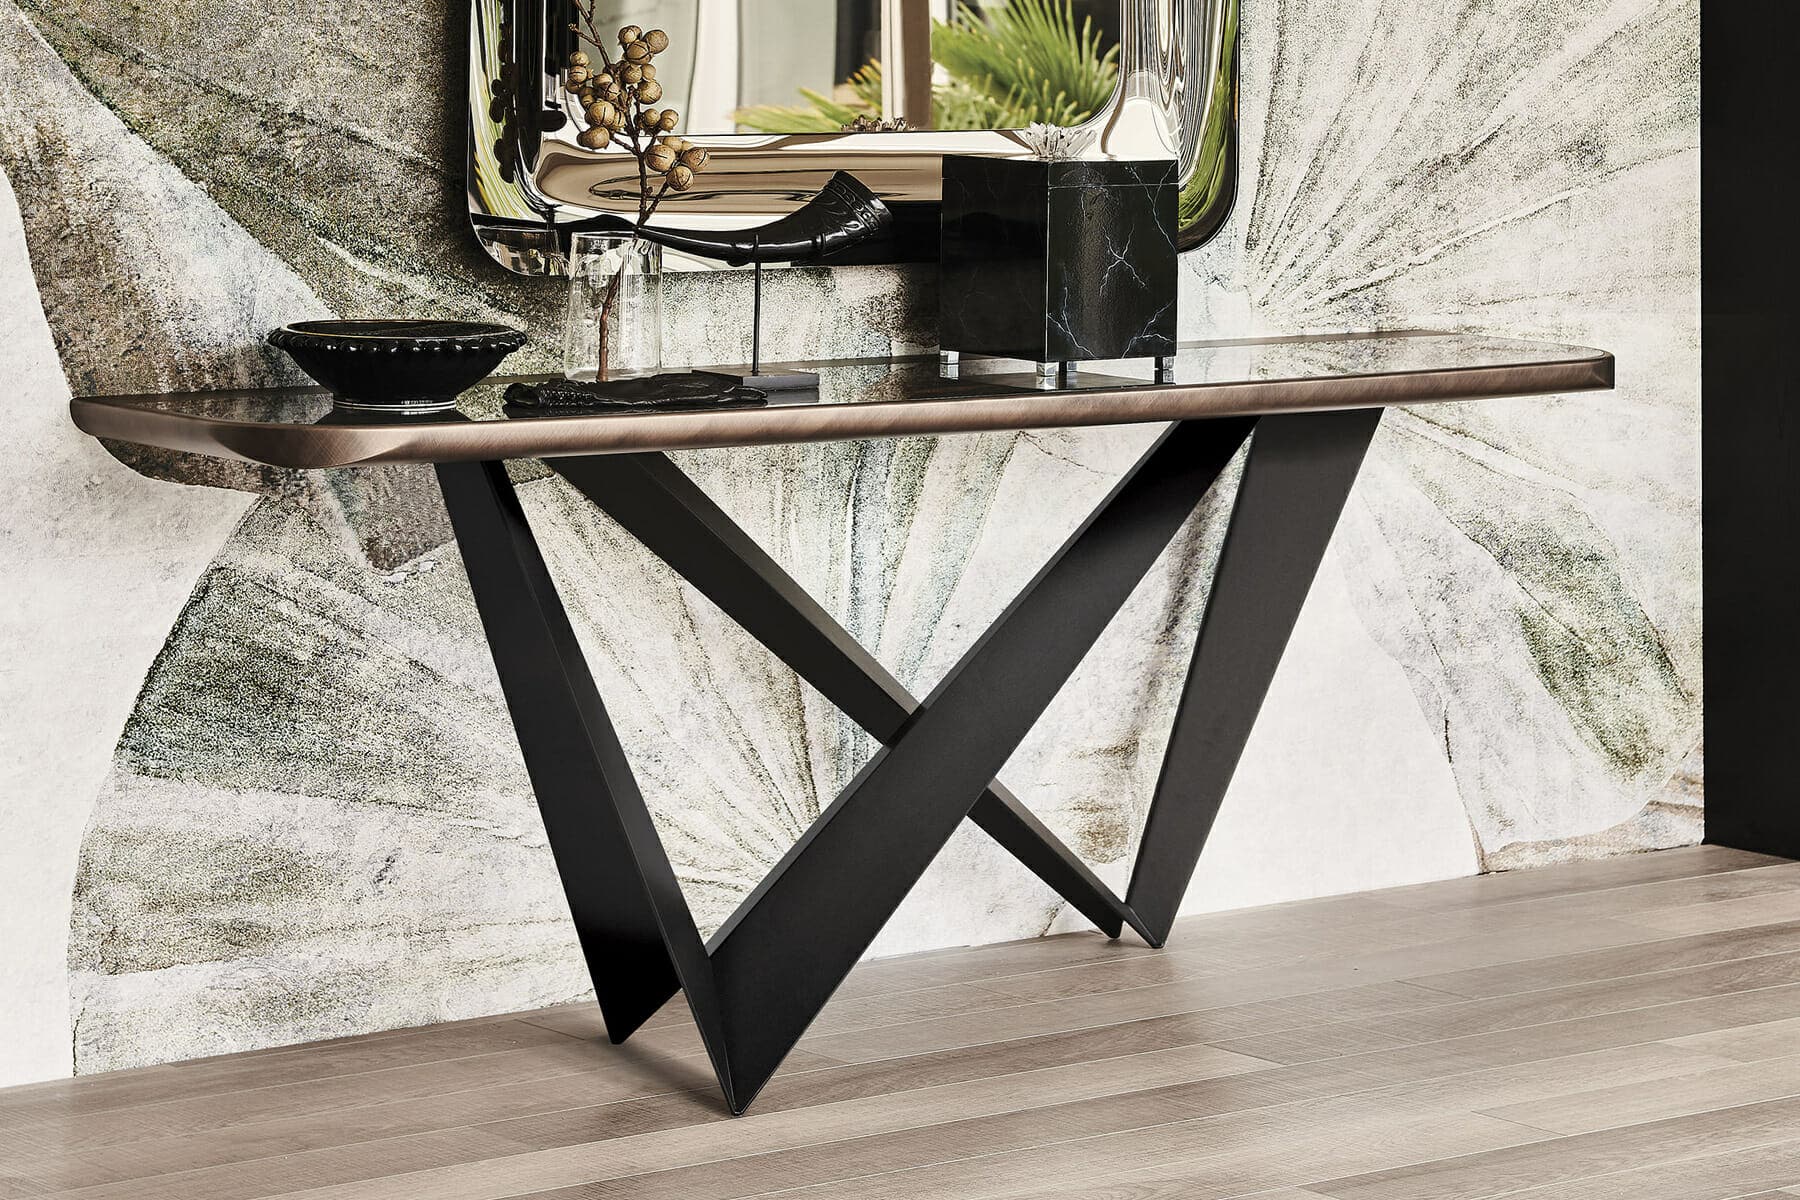 High Quality Sofa Table & Console Table from San Fran Design